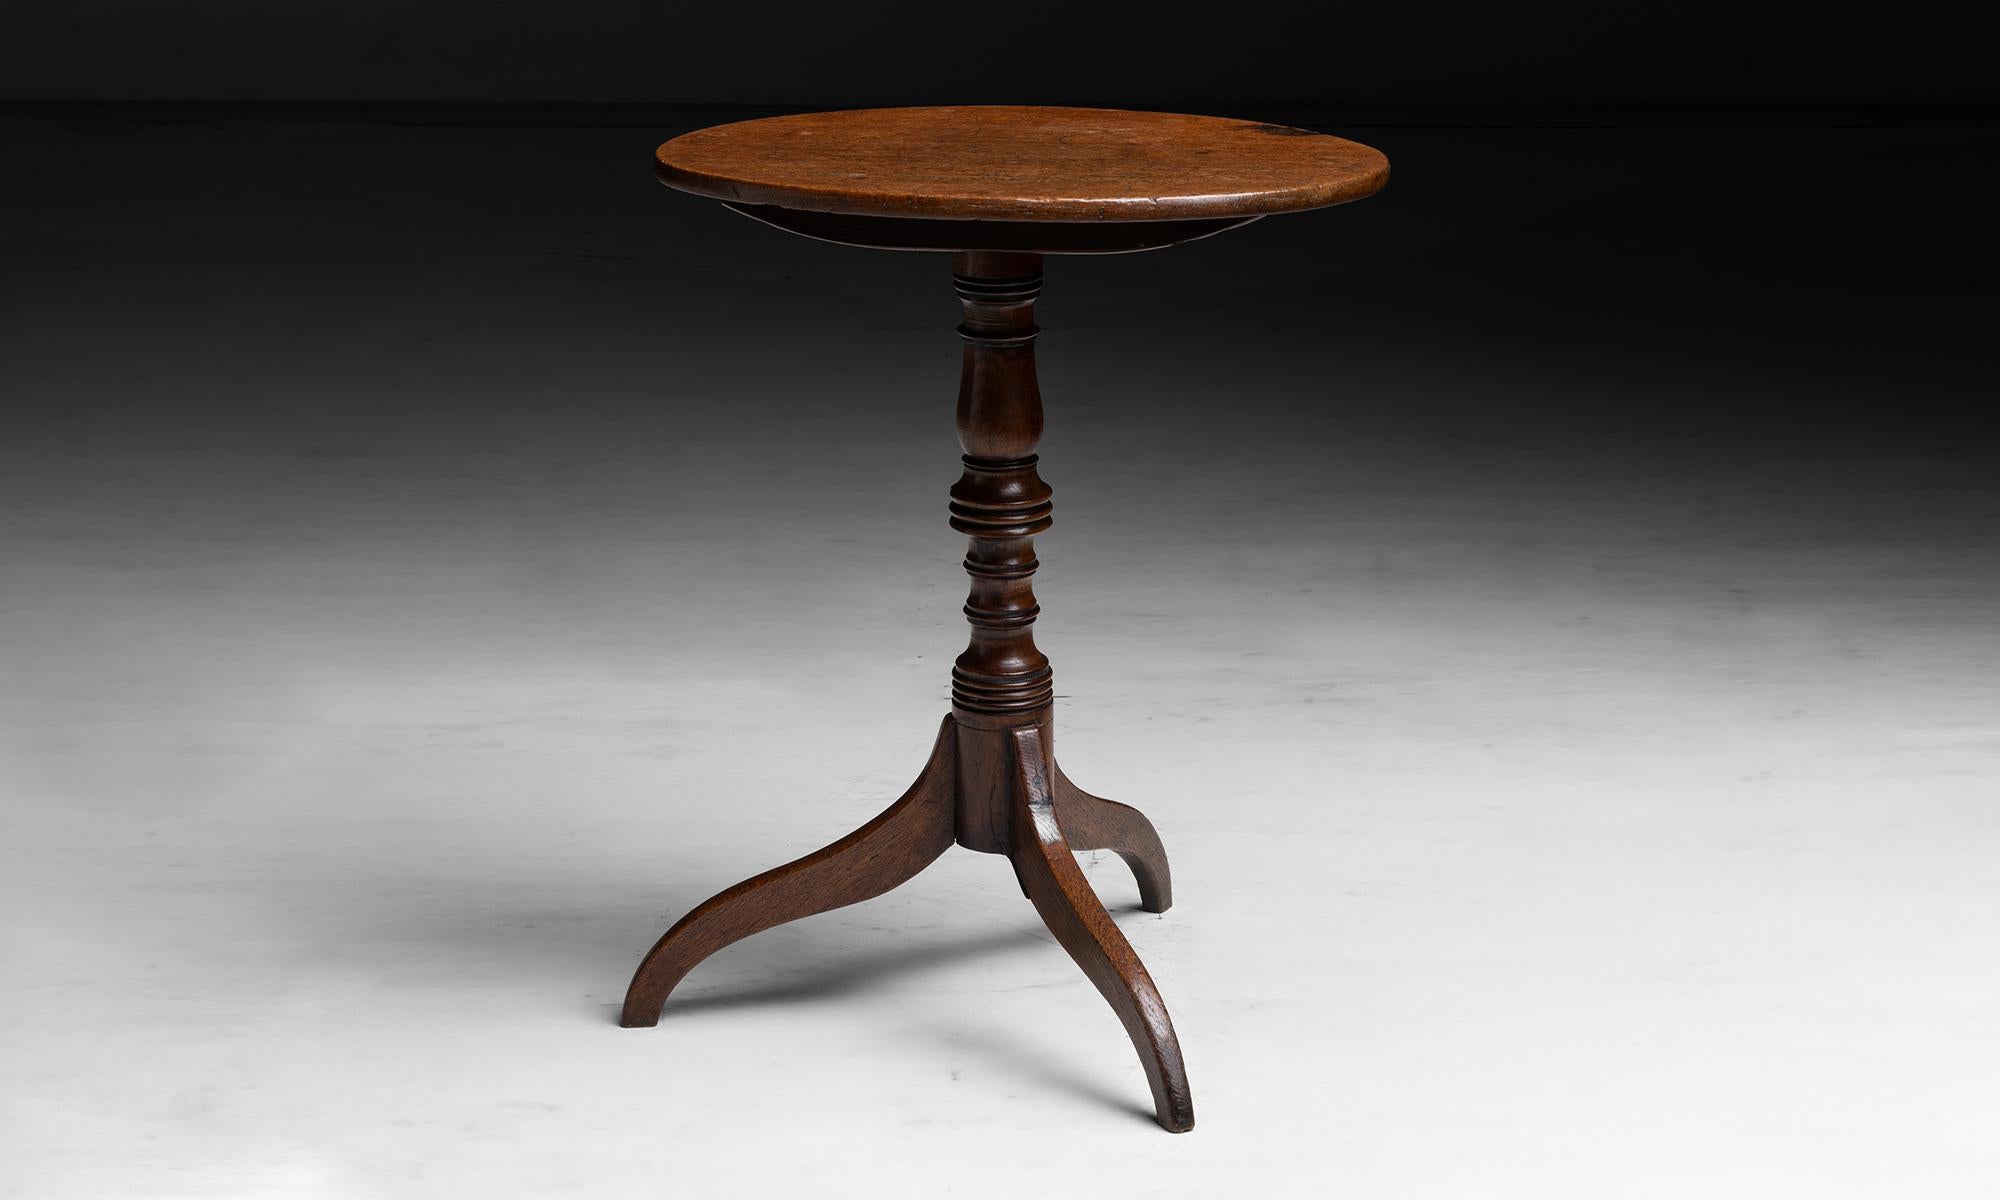 Tilt Top Side Table

England circa 1800

Georgian side table with tilt top function, composed of oak.

20.25”w x 20”d x 25.75”h